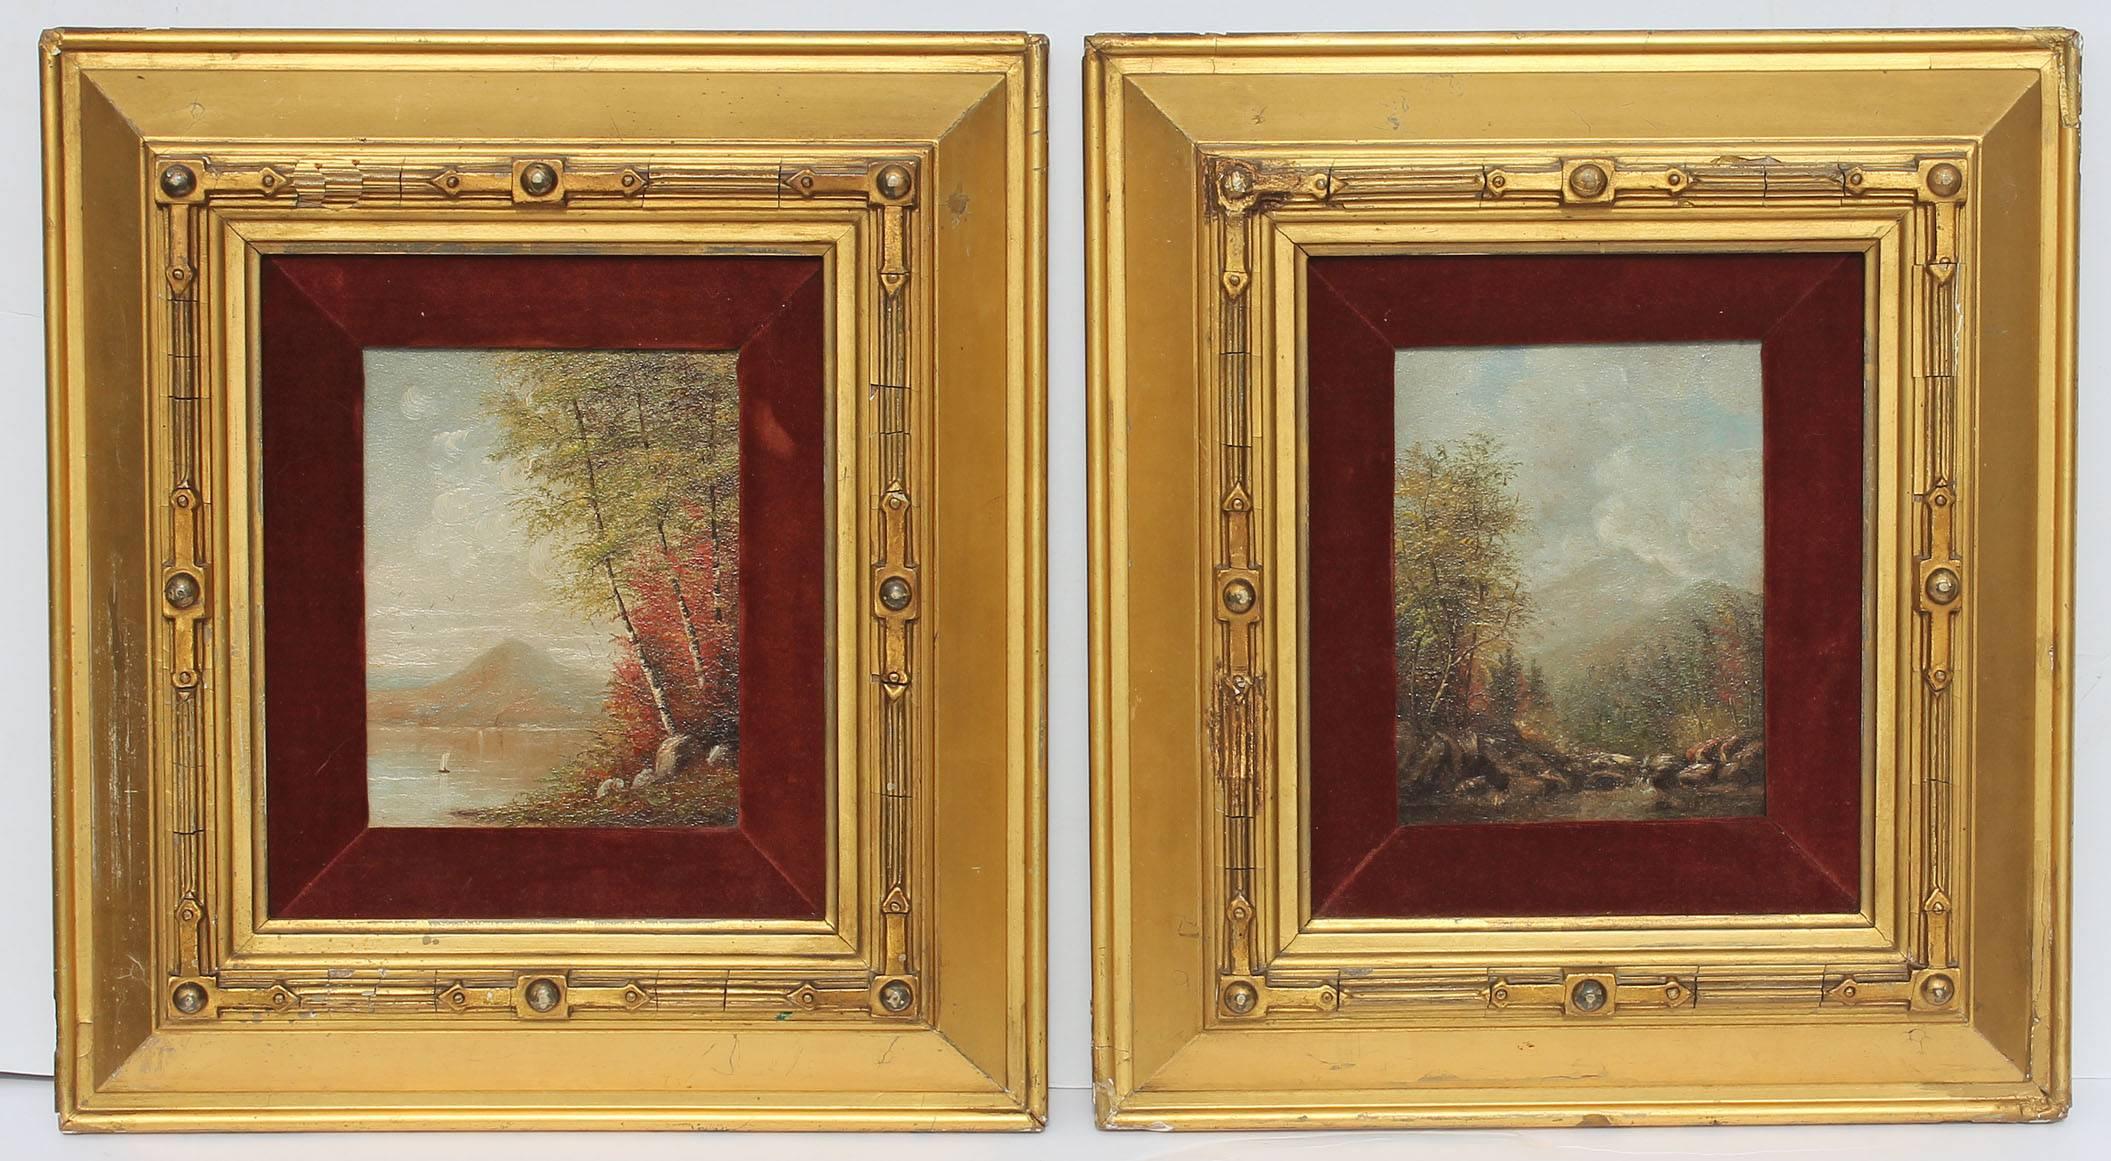 Pair of Hudson river school oil paintings. Possibly the White mountains. One is monogrammed, see last photo. Oil on board. In original frames, circa 1870's.